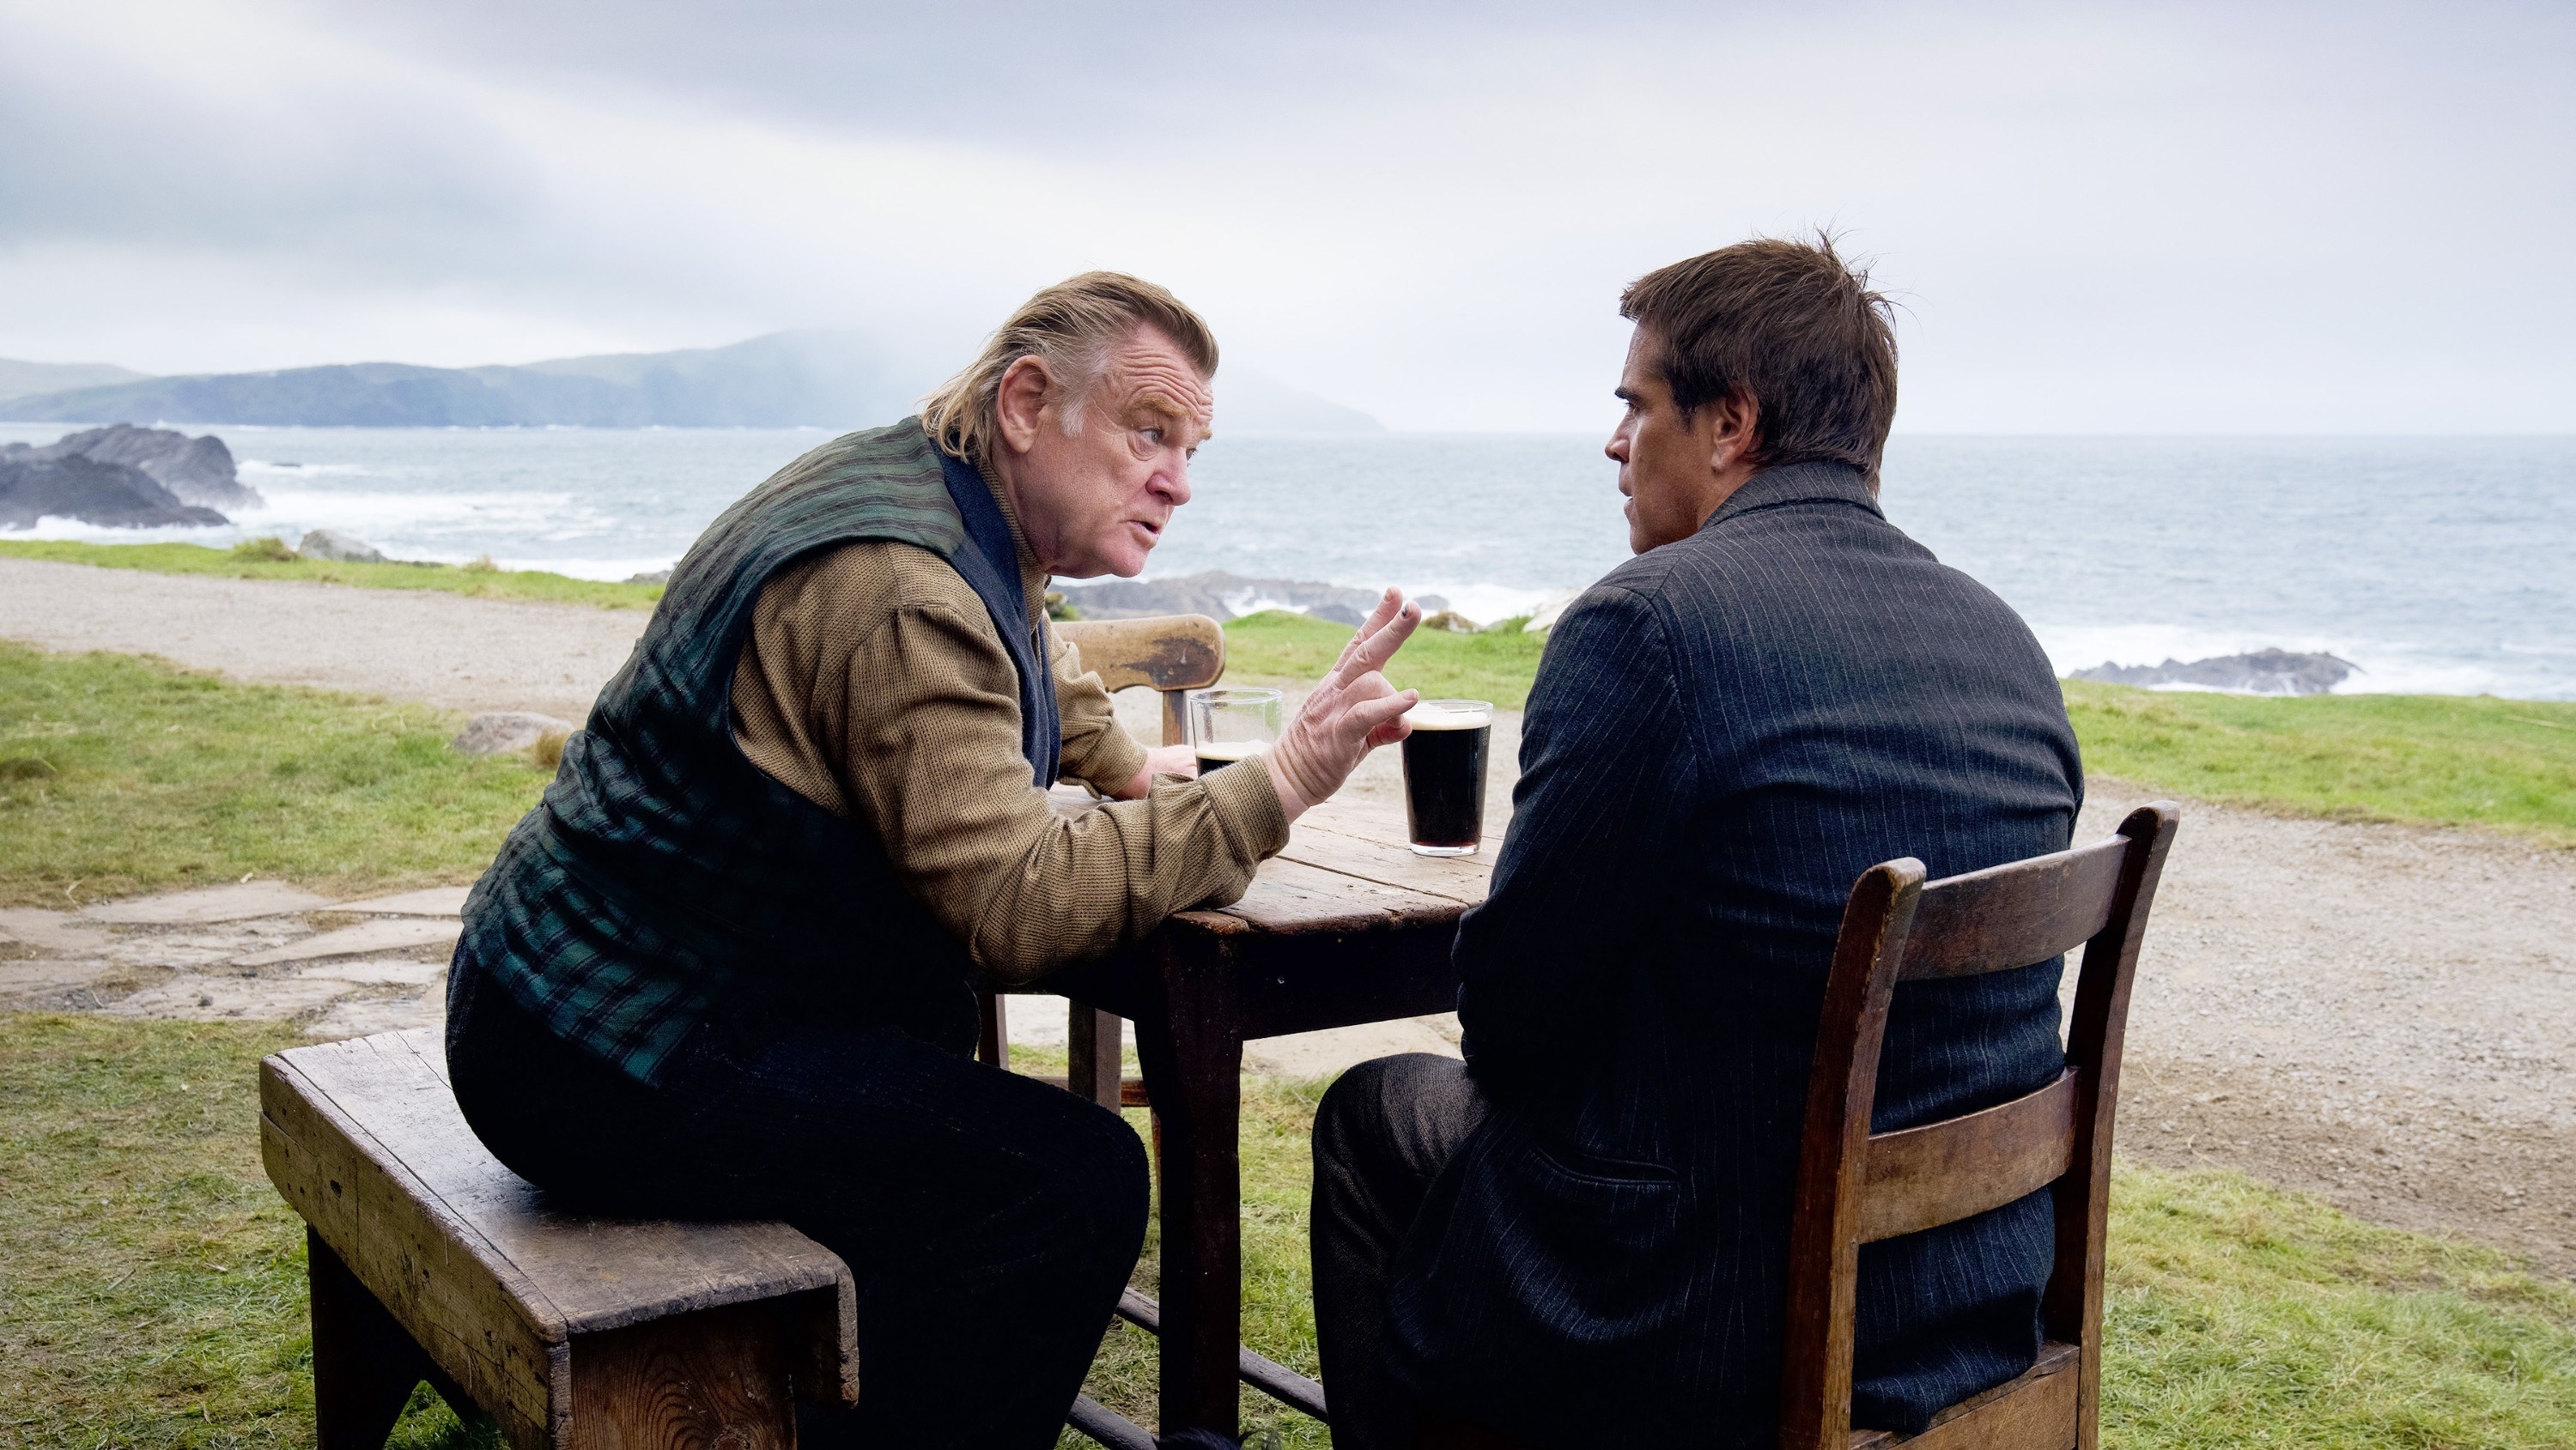 Brendan Gleeson and Colin Farrell talk over beers outside